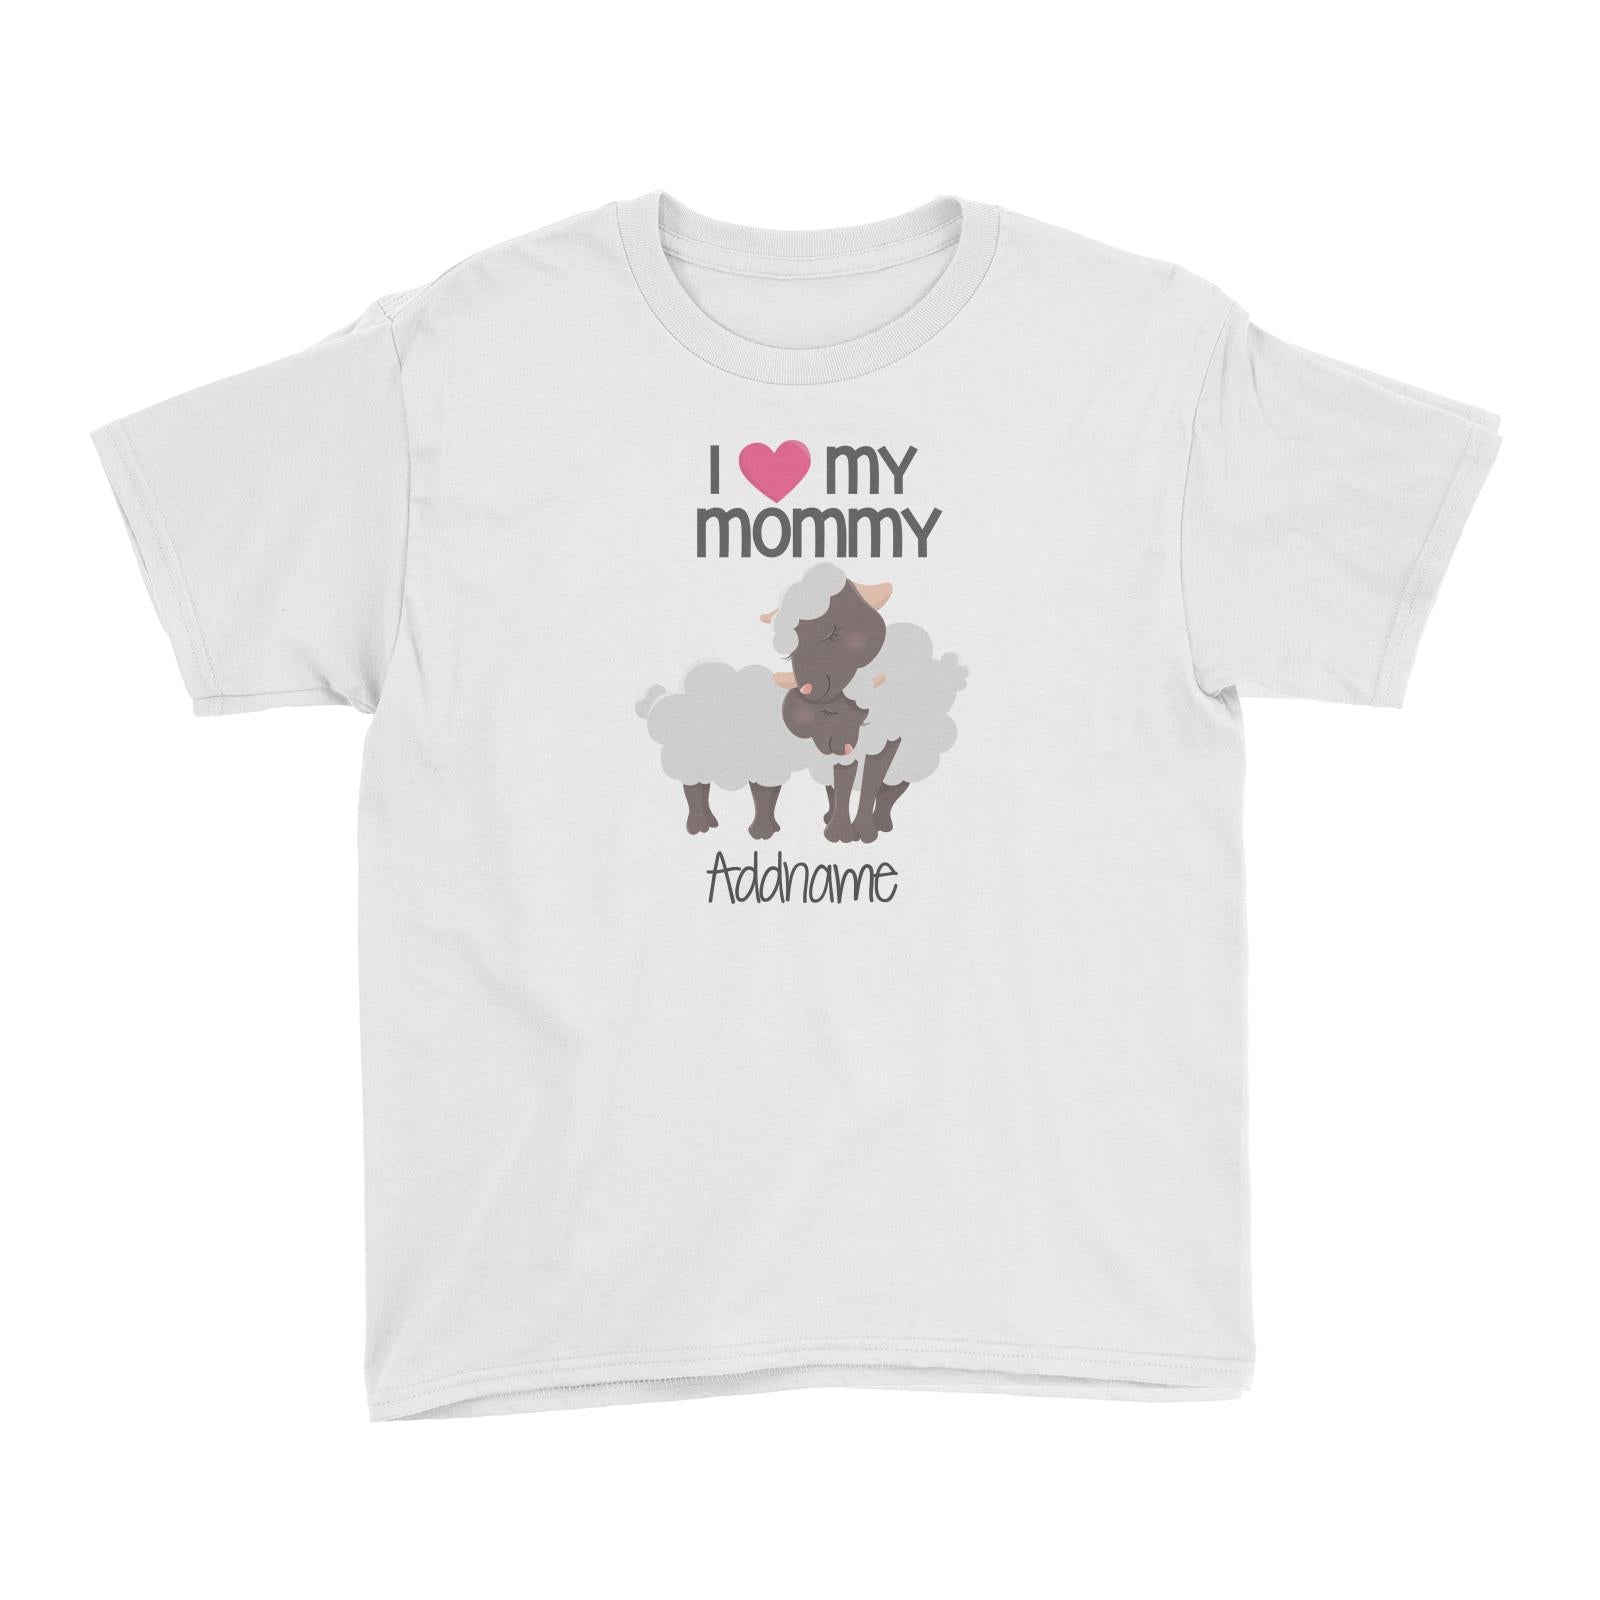 Animal &Loved Ones Sheep I Love My Mommy Addname Kid's T-Shirt